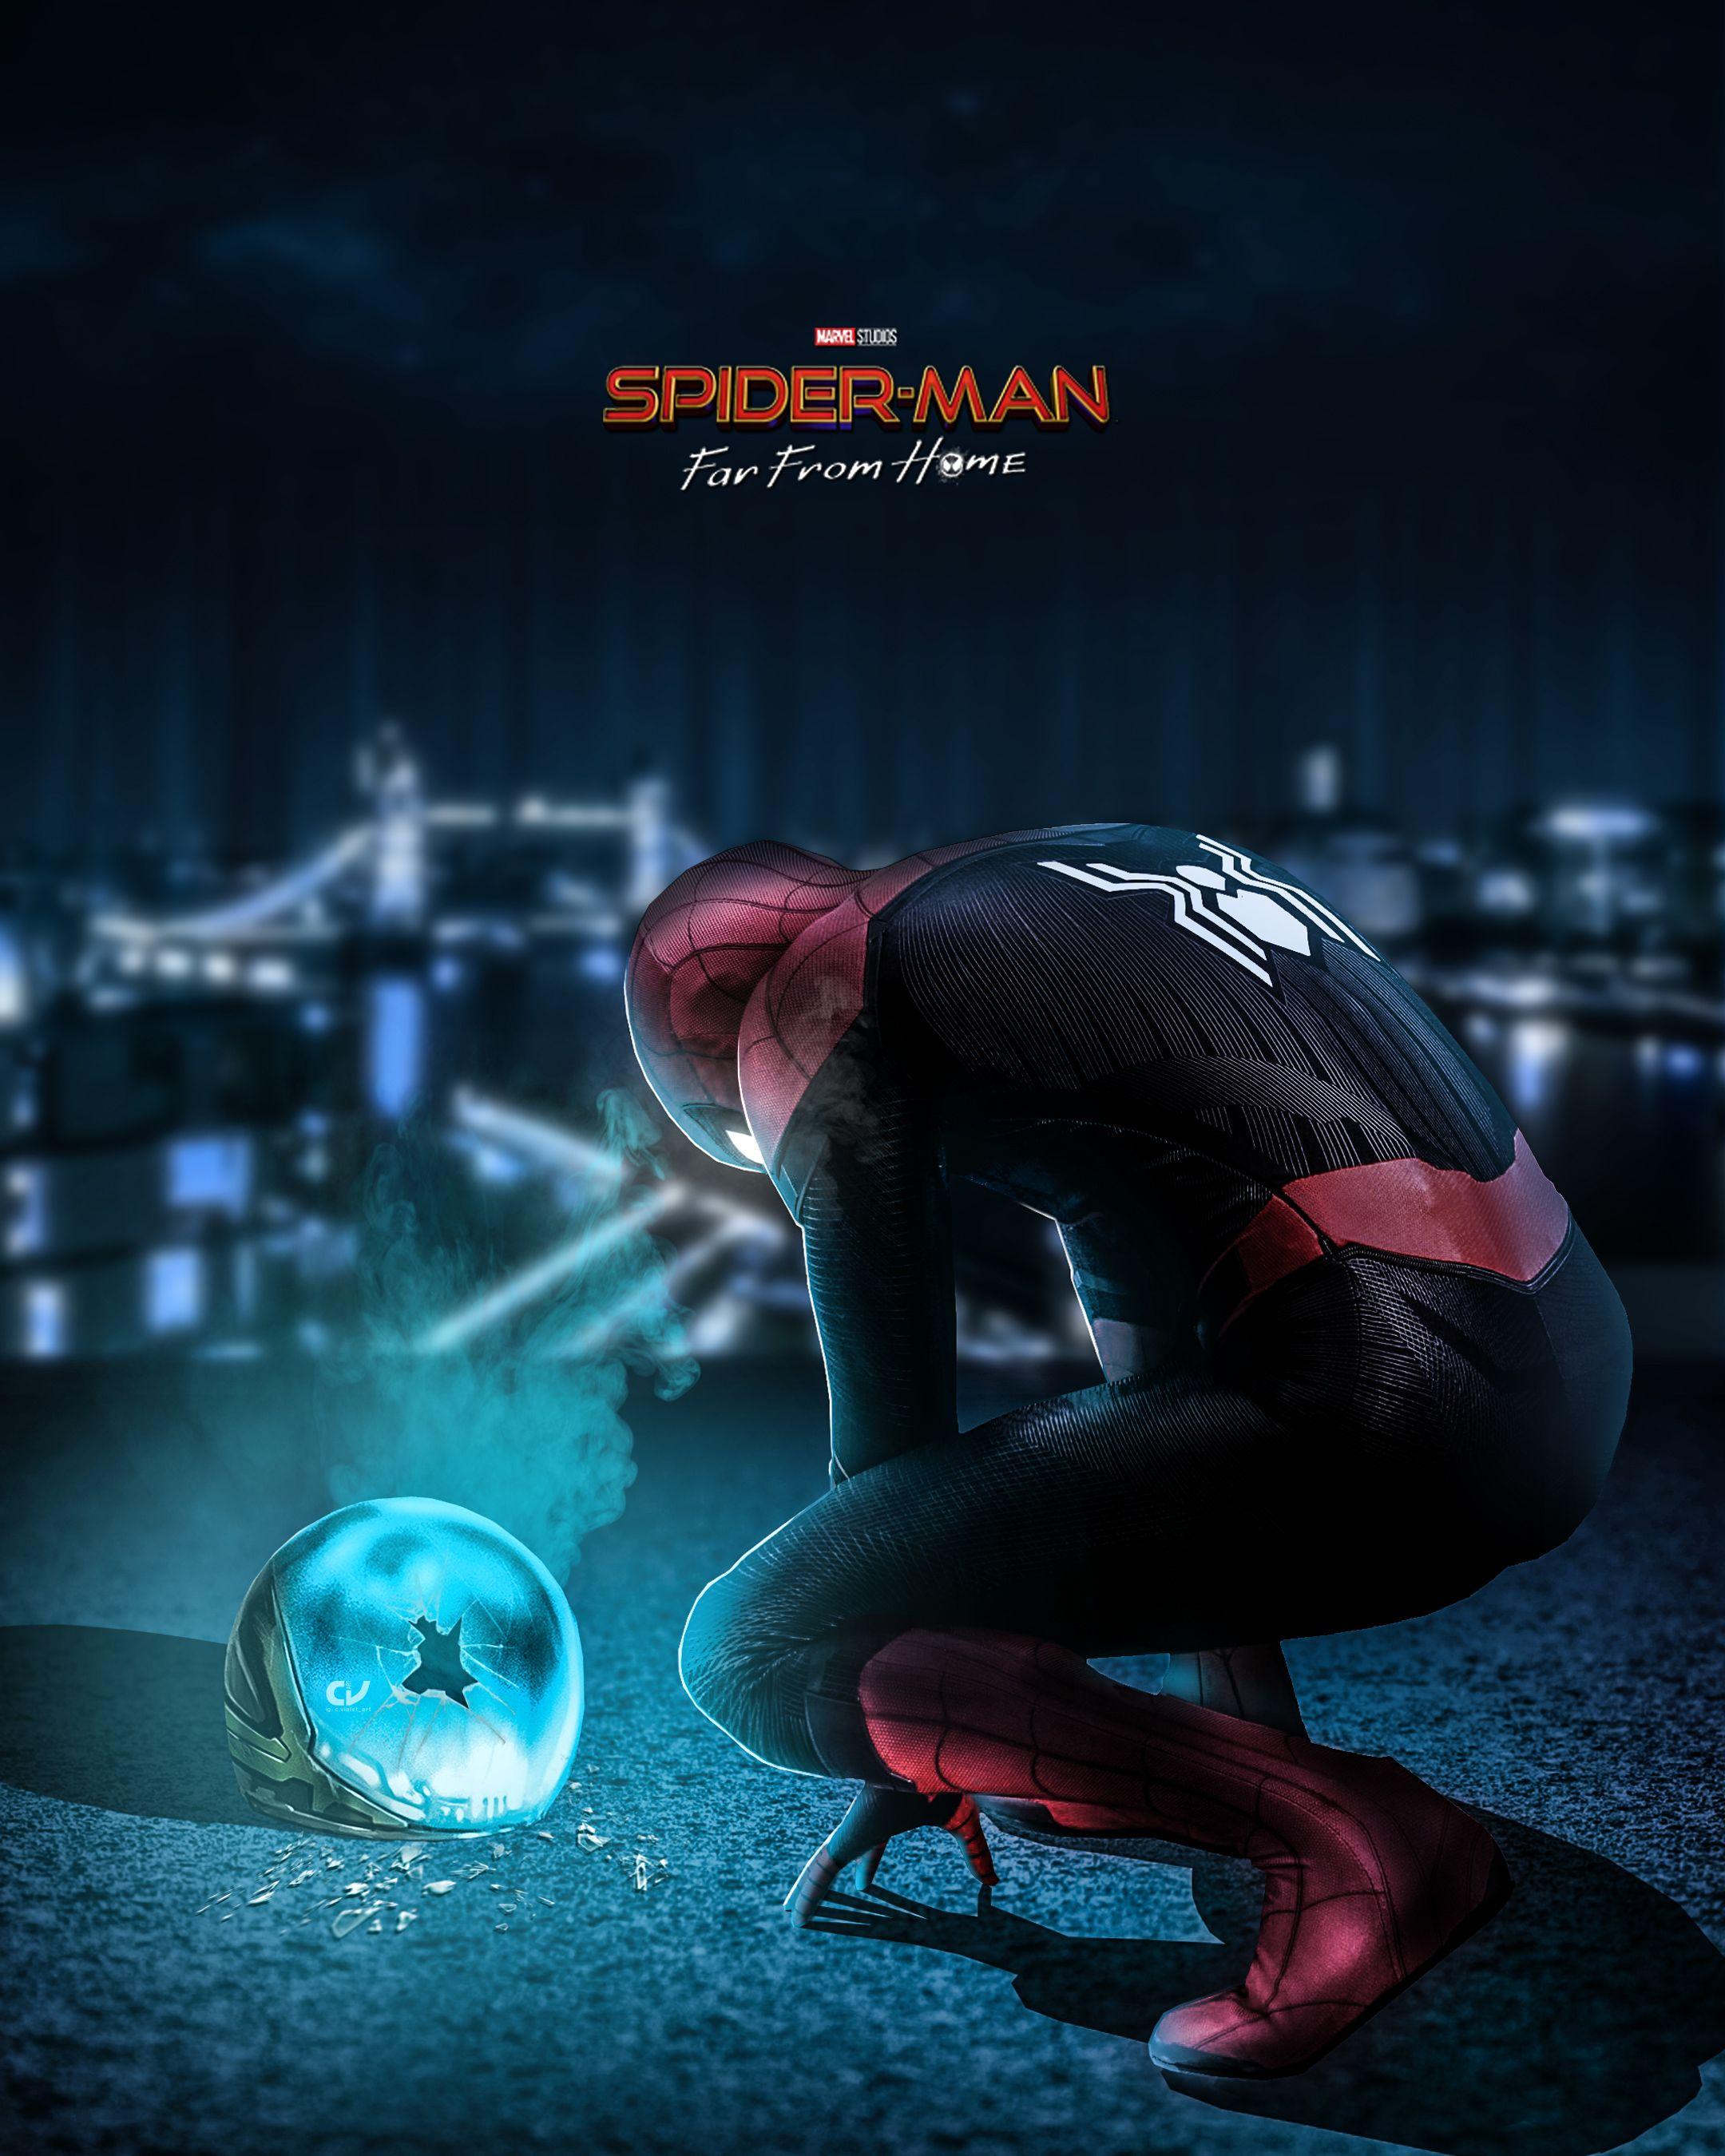 Spiderman wallpaper. Is that glowing thing related to